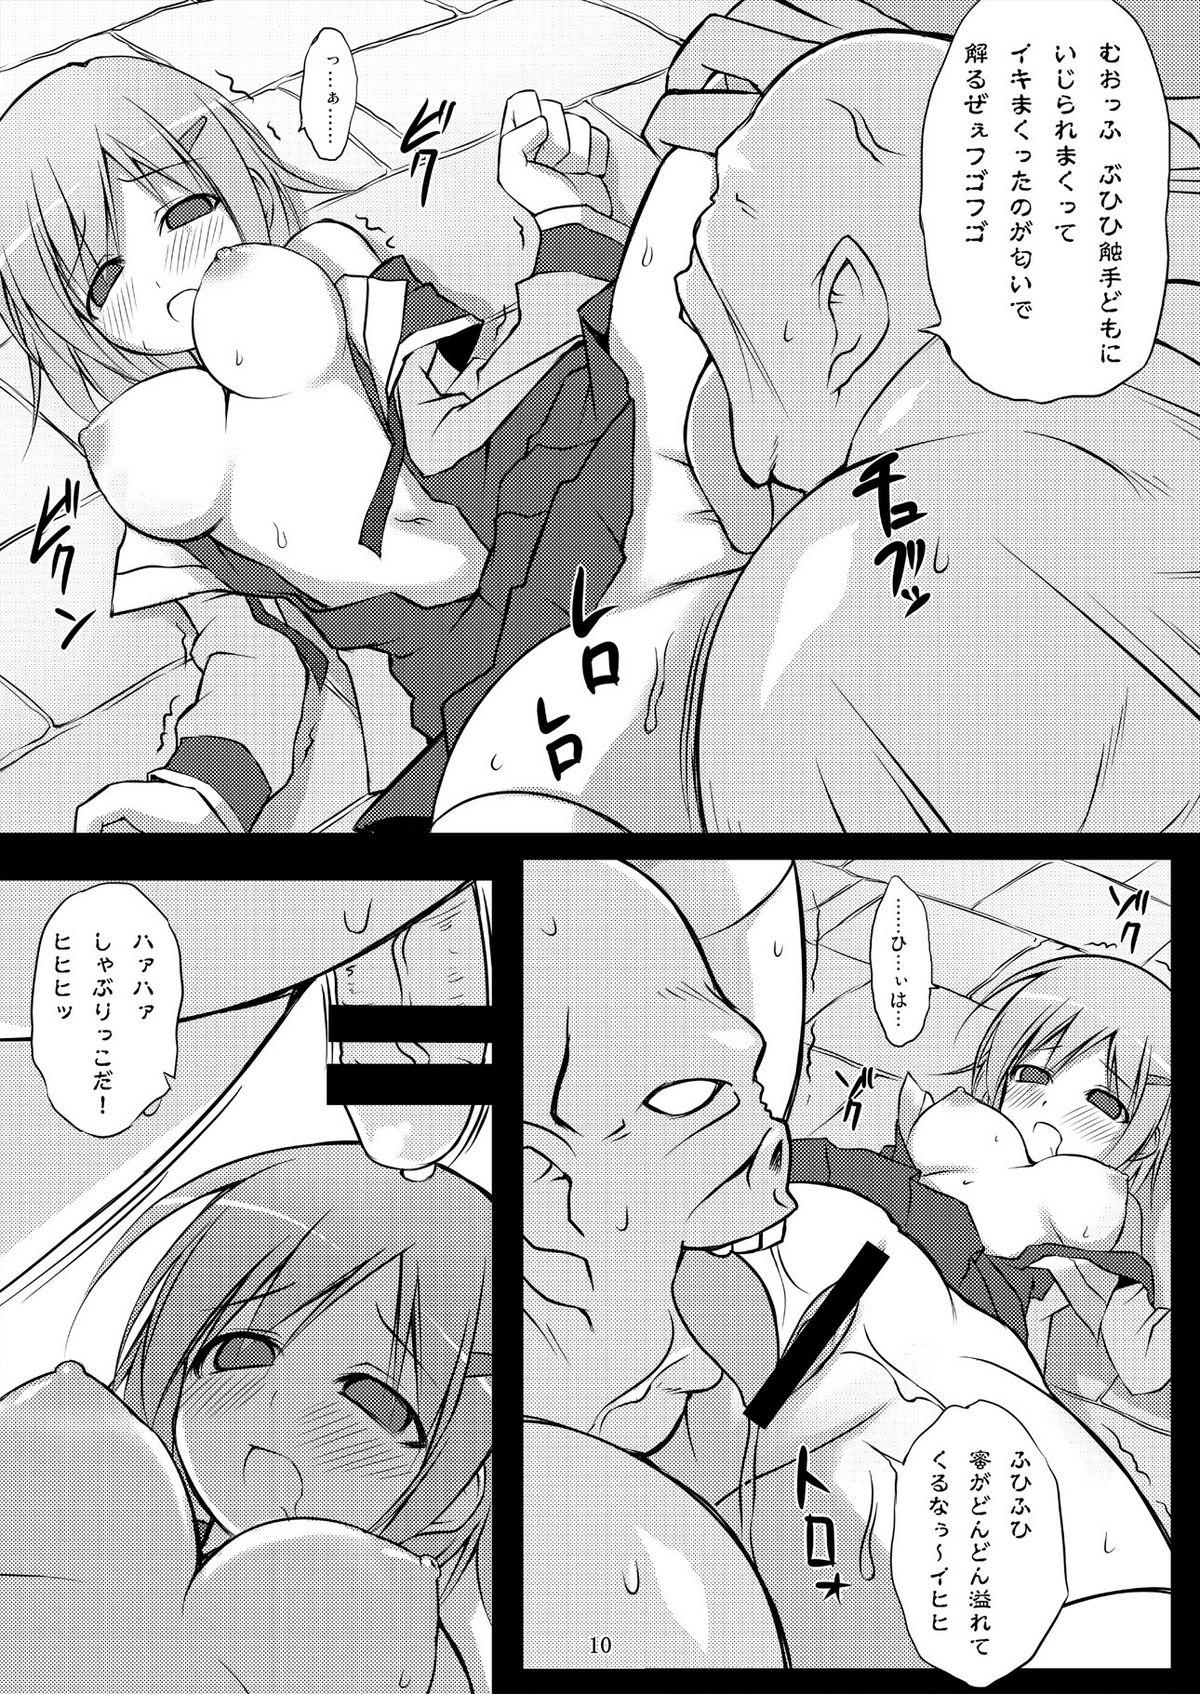 Double Blowjob 魔法戦士触獄に堕つ～獄卒の洗礼～ Indoor - Page 10